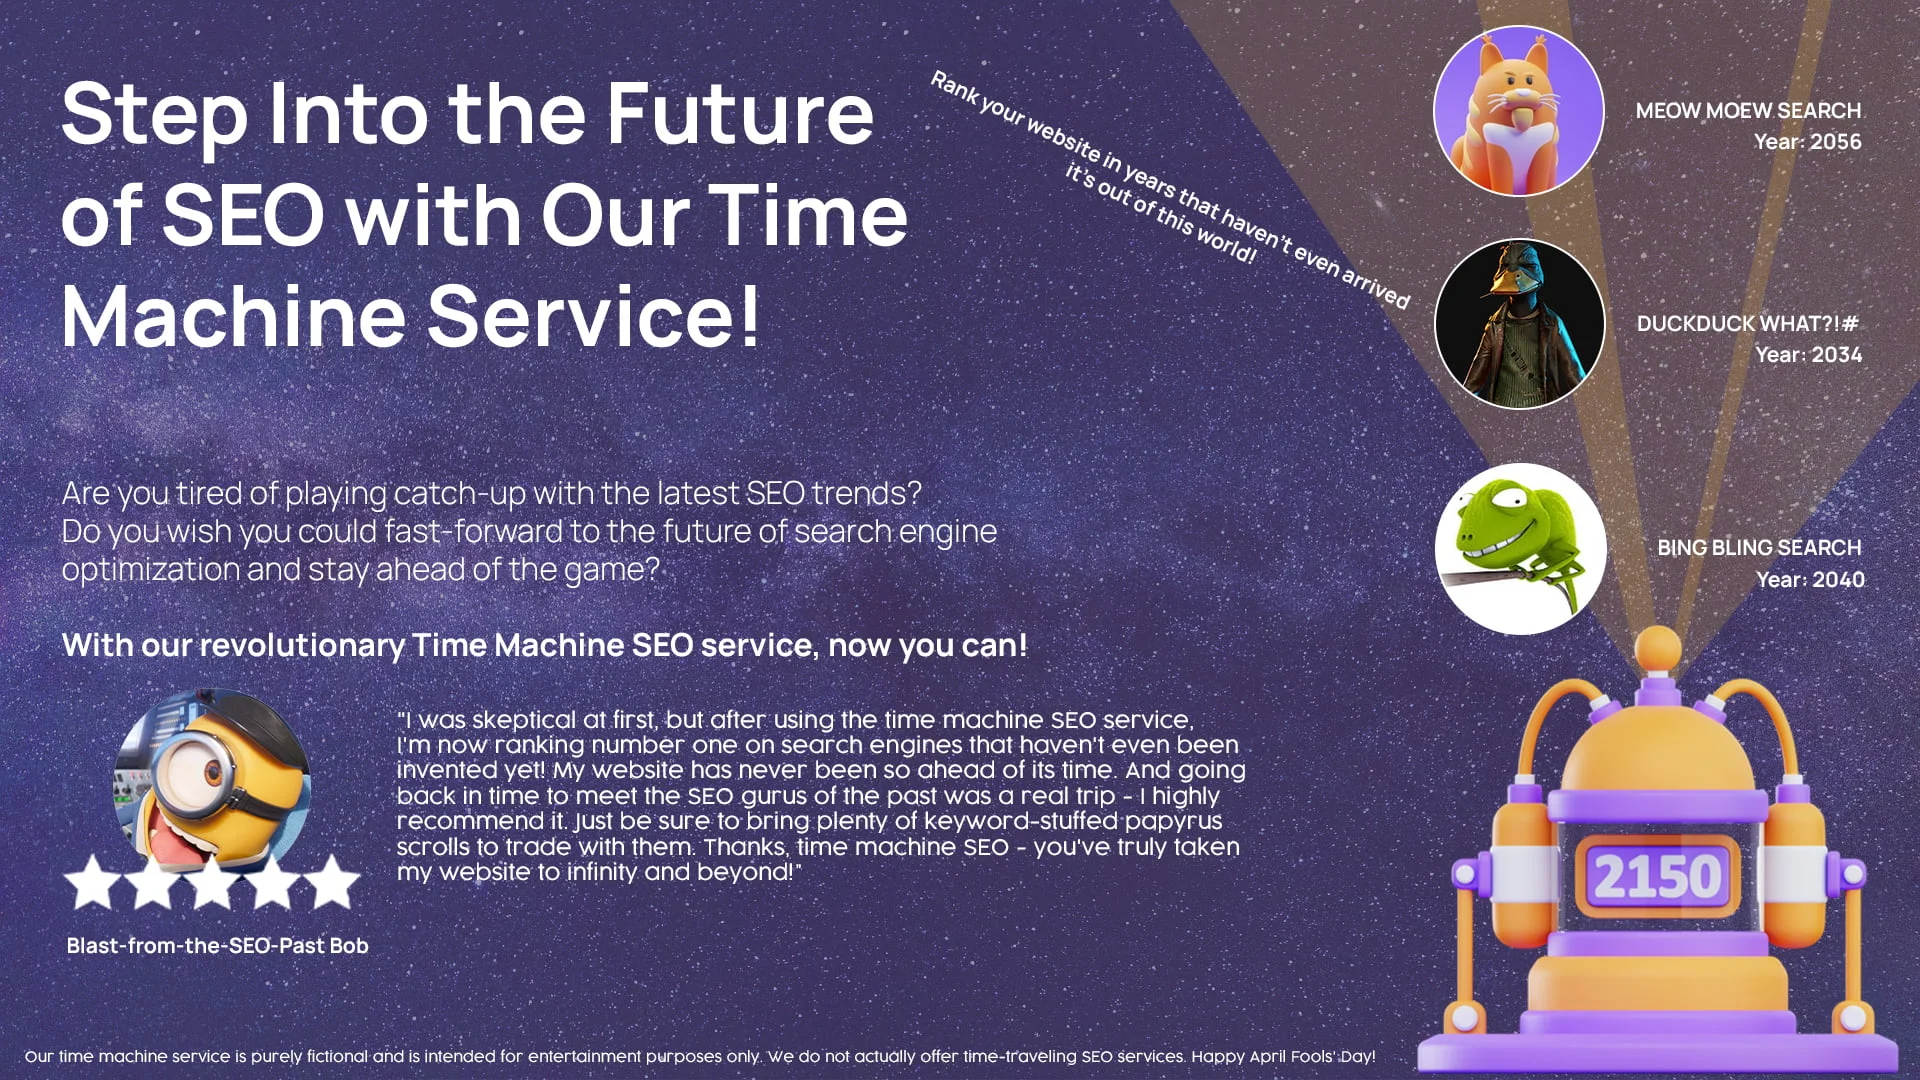 Step Into the Future of SEO with Our Time Machine Service!